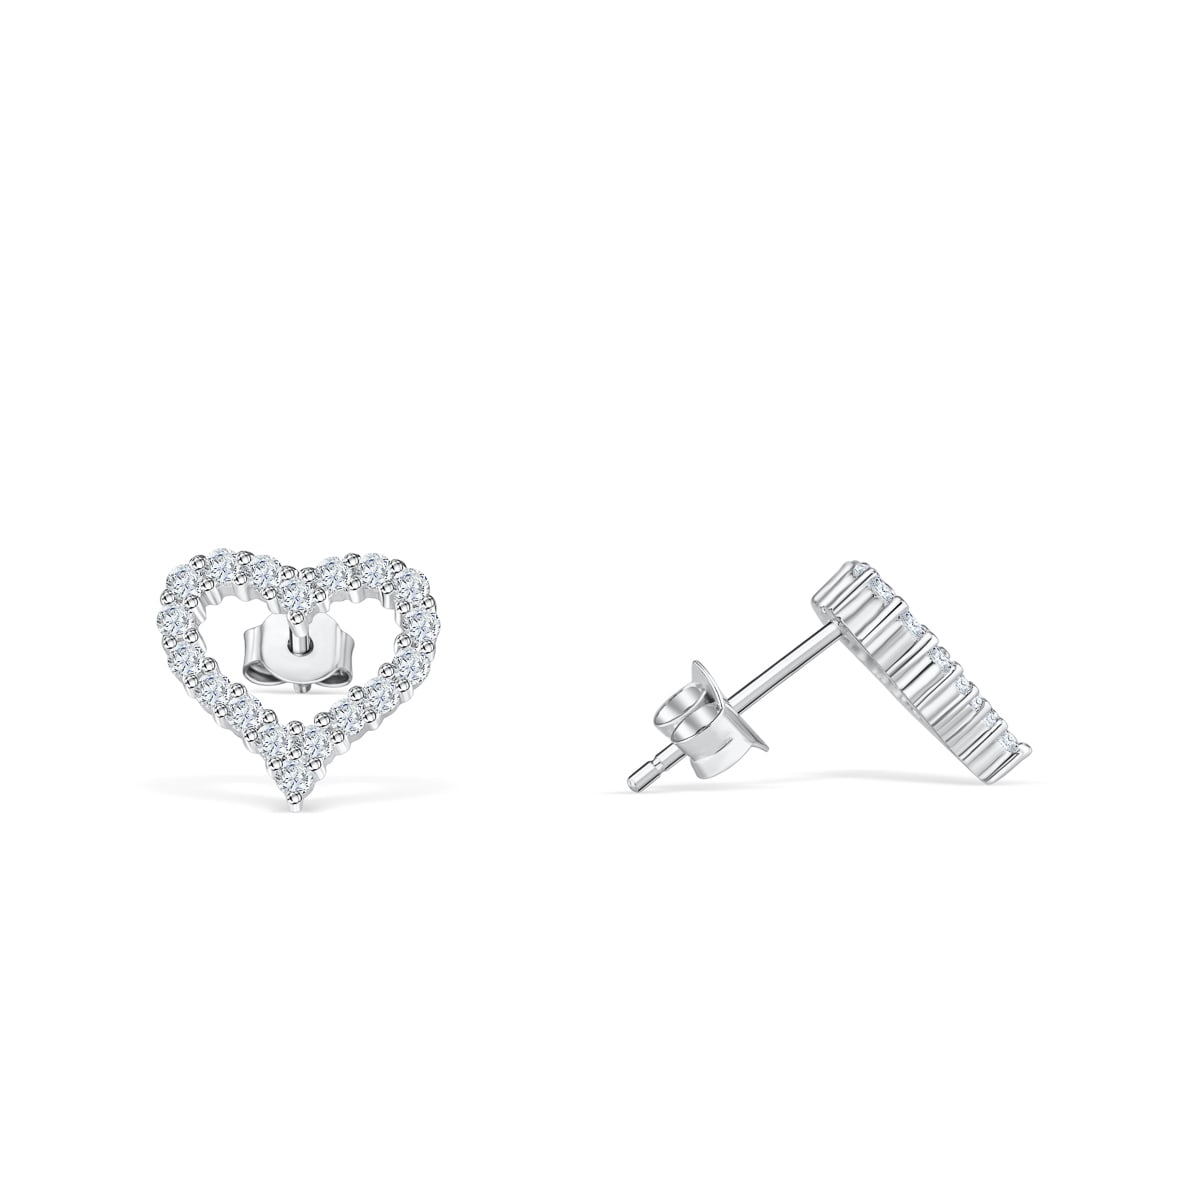 How to Tell If a Diamond Earring Is Real at Home - ItsHot